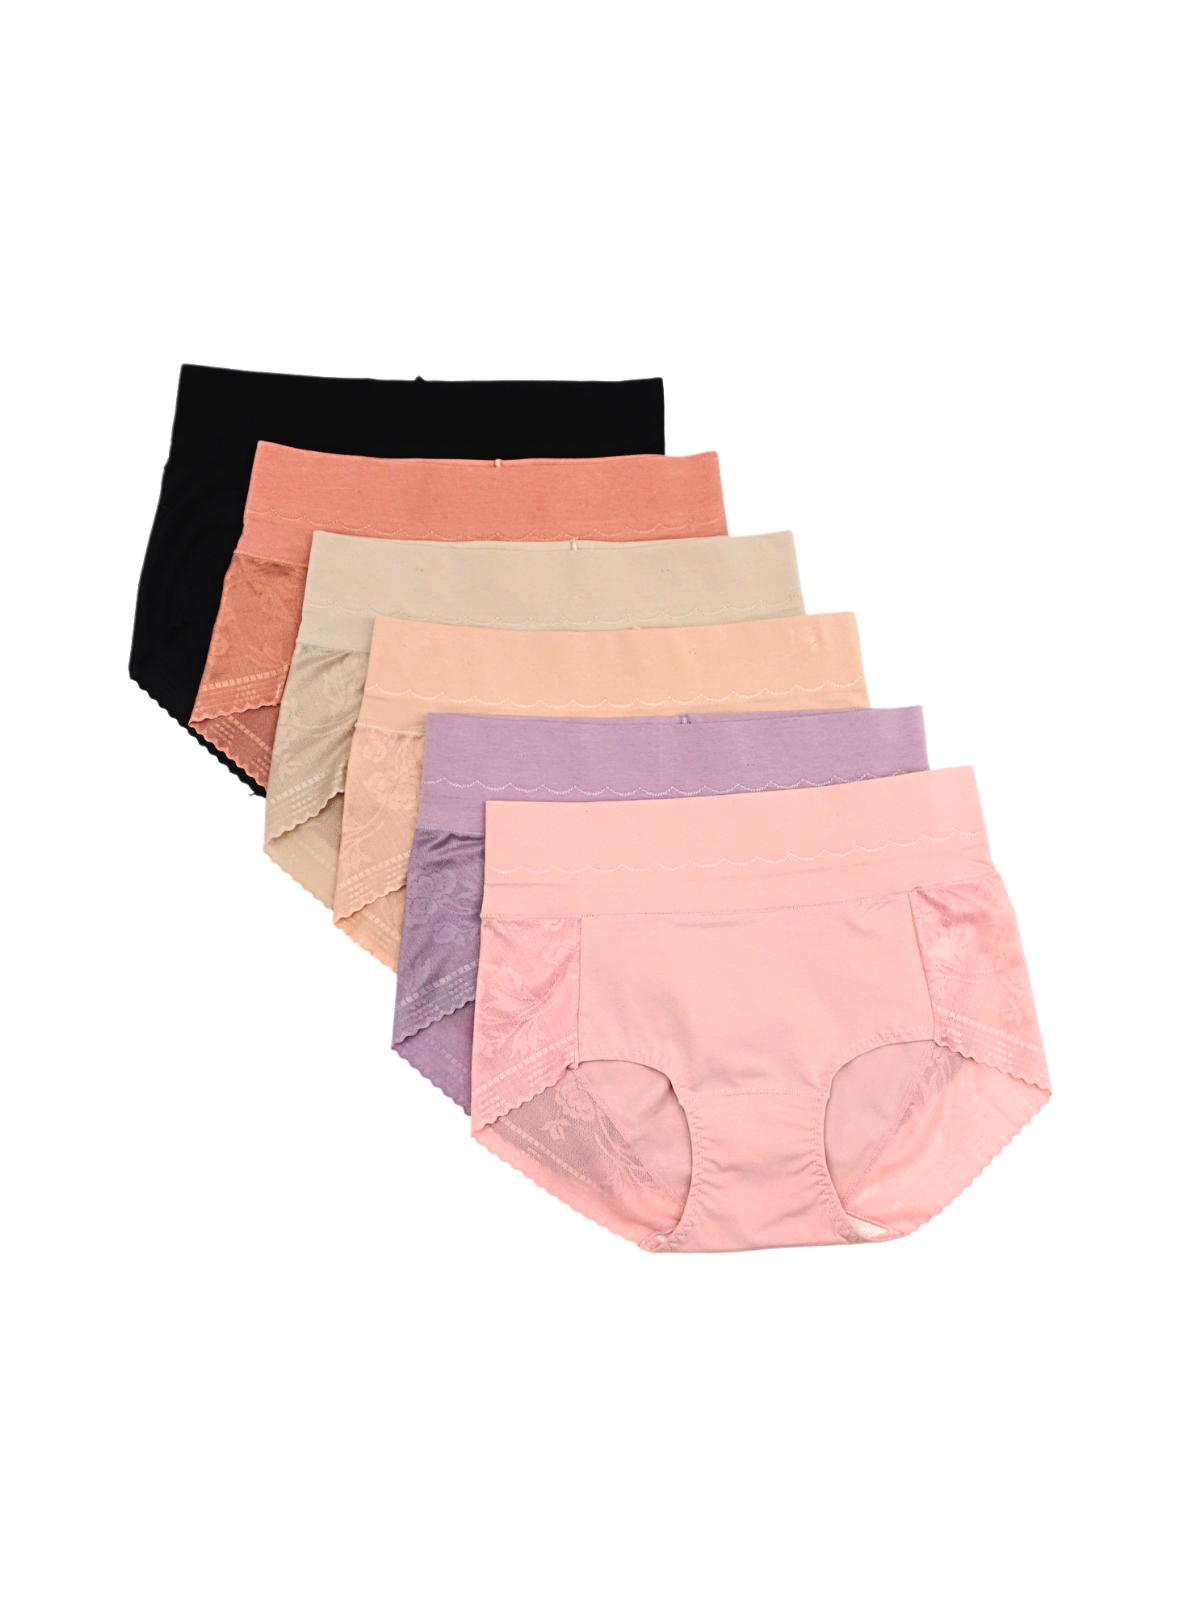 6 Pack Noelle High Waisted Cotton with Lace Panties Bundle B